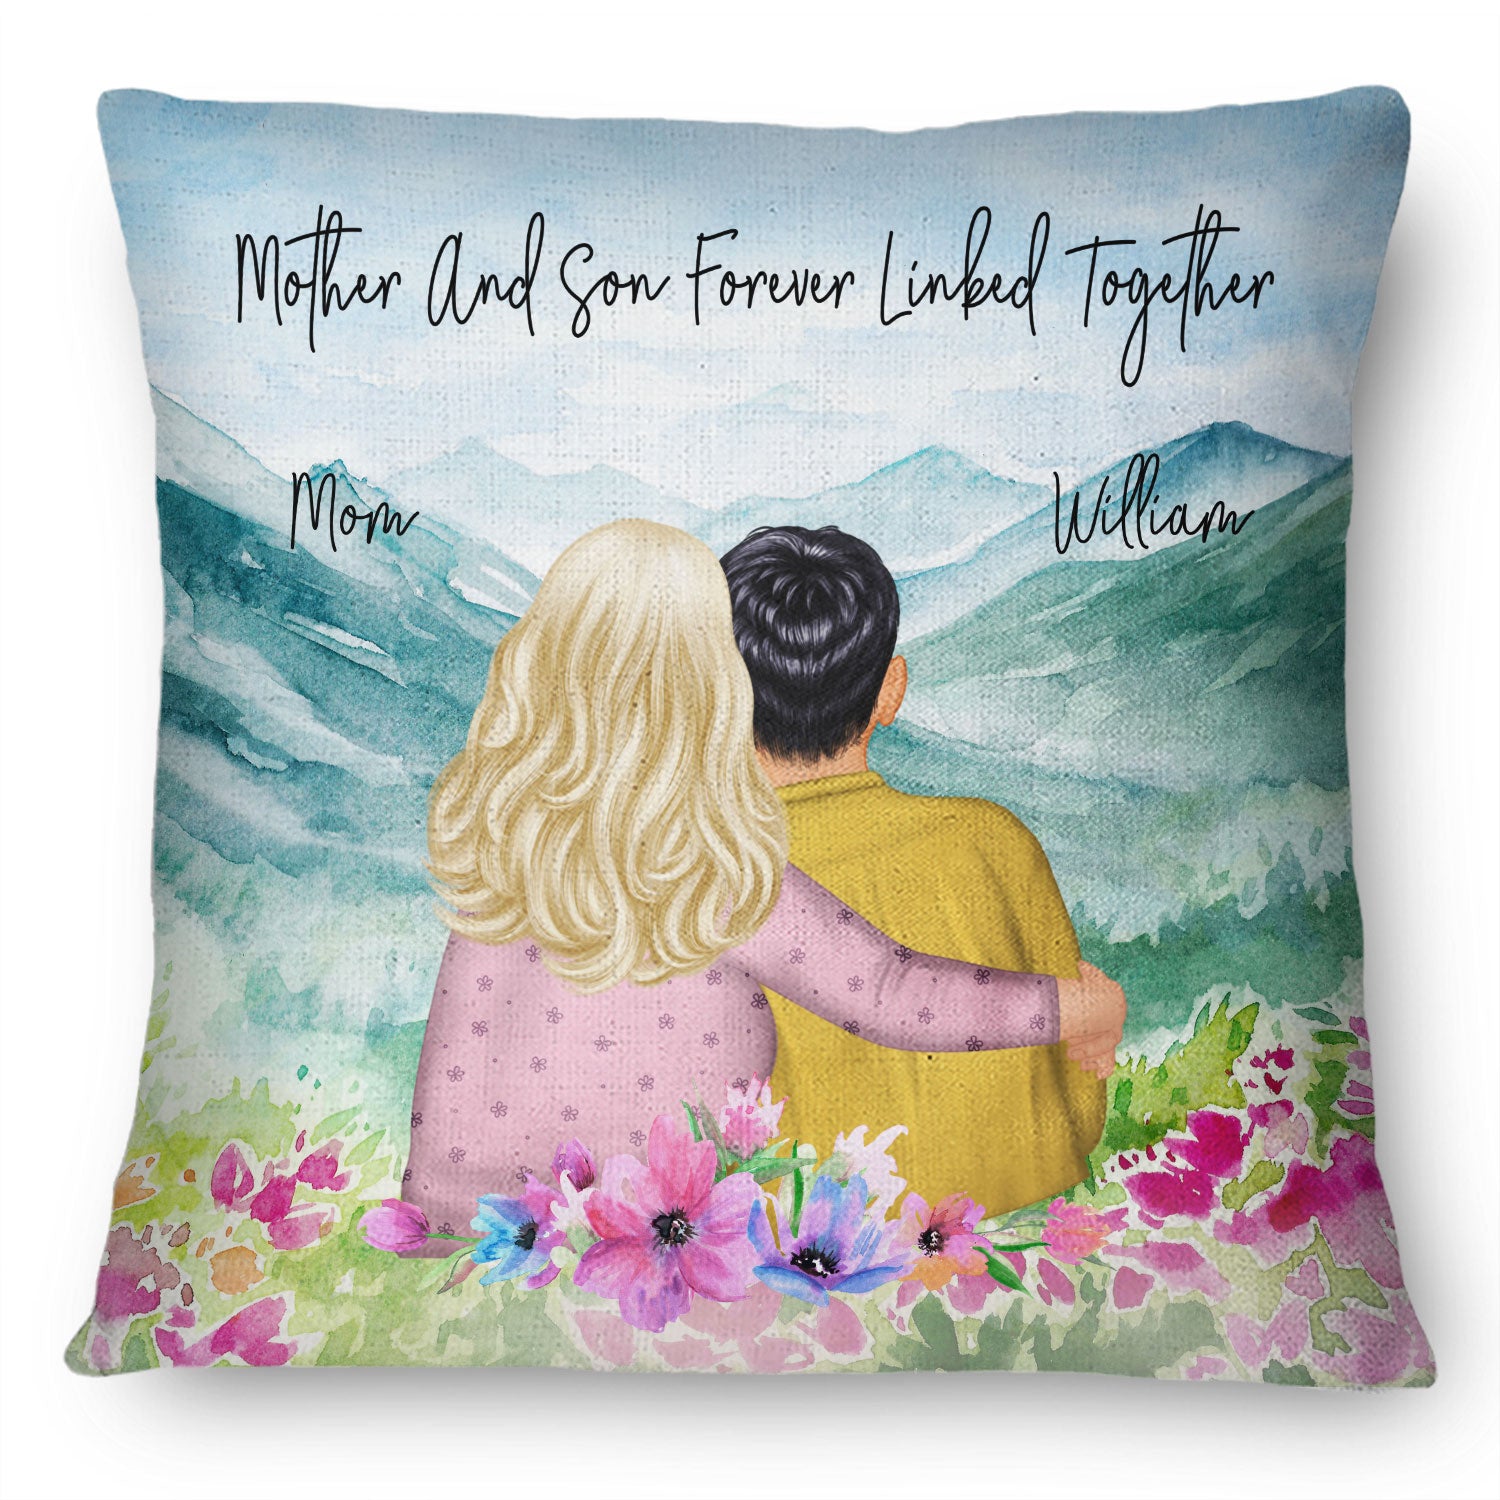 Mother And Son Forever Linked Together Watercolor Style - Birthday, Family Gift For Mom, Grandma, Grandson, Grandchild, Grandkid - Personalized Custom Pillow